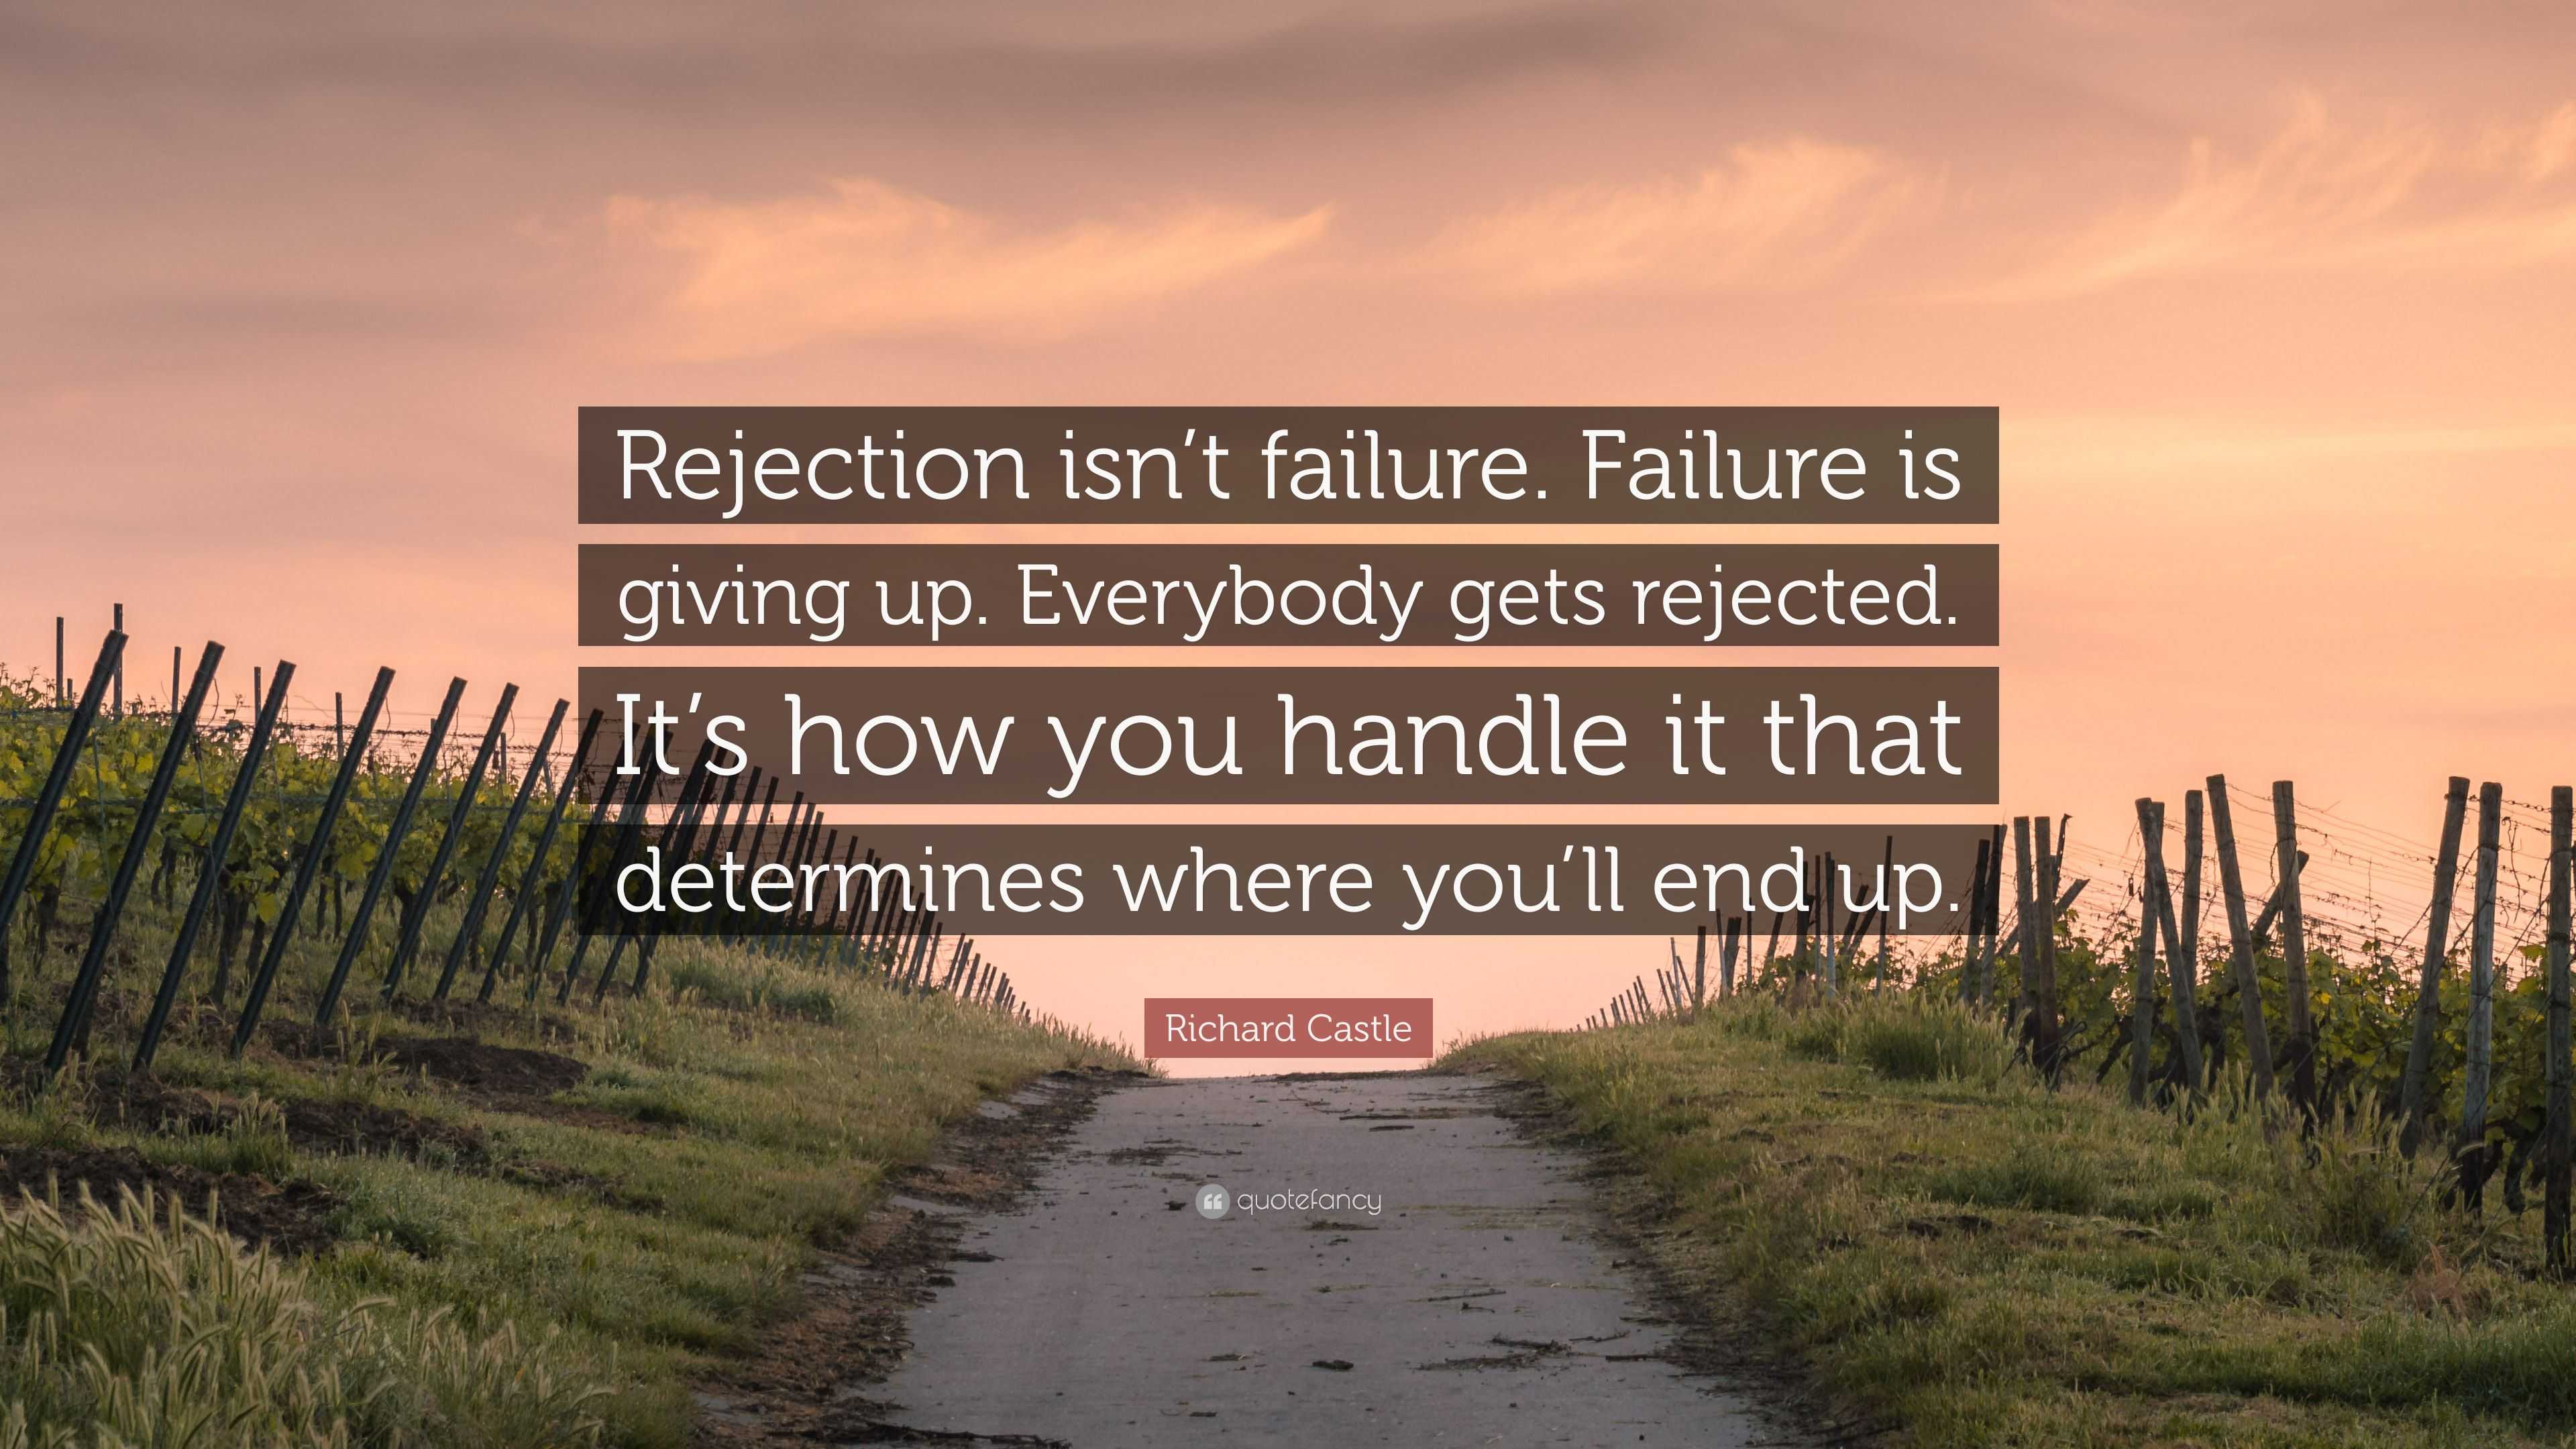 Richard Castle Quote “Rejection isn’t failure. Failure is giving up